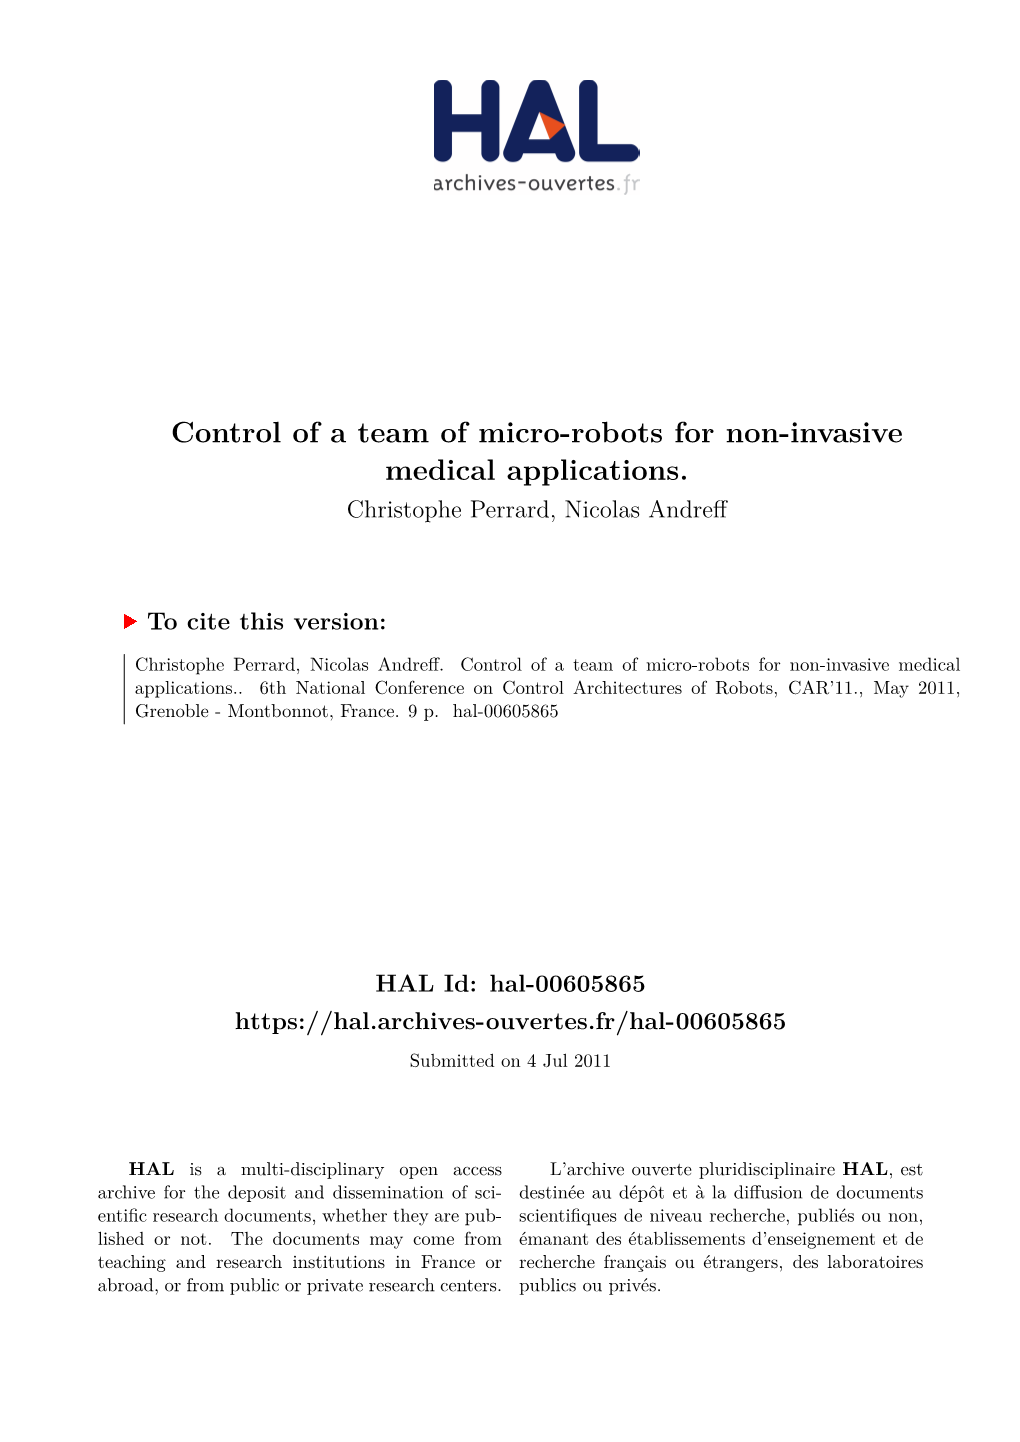 Control of a Team of Micro-Robots for Non-Invasive Medical Applications. Christophe Perrard, Nicolas Andreff